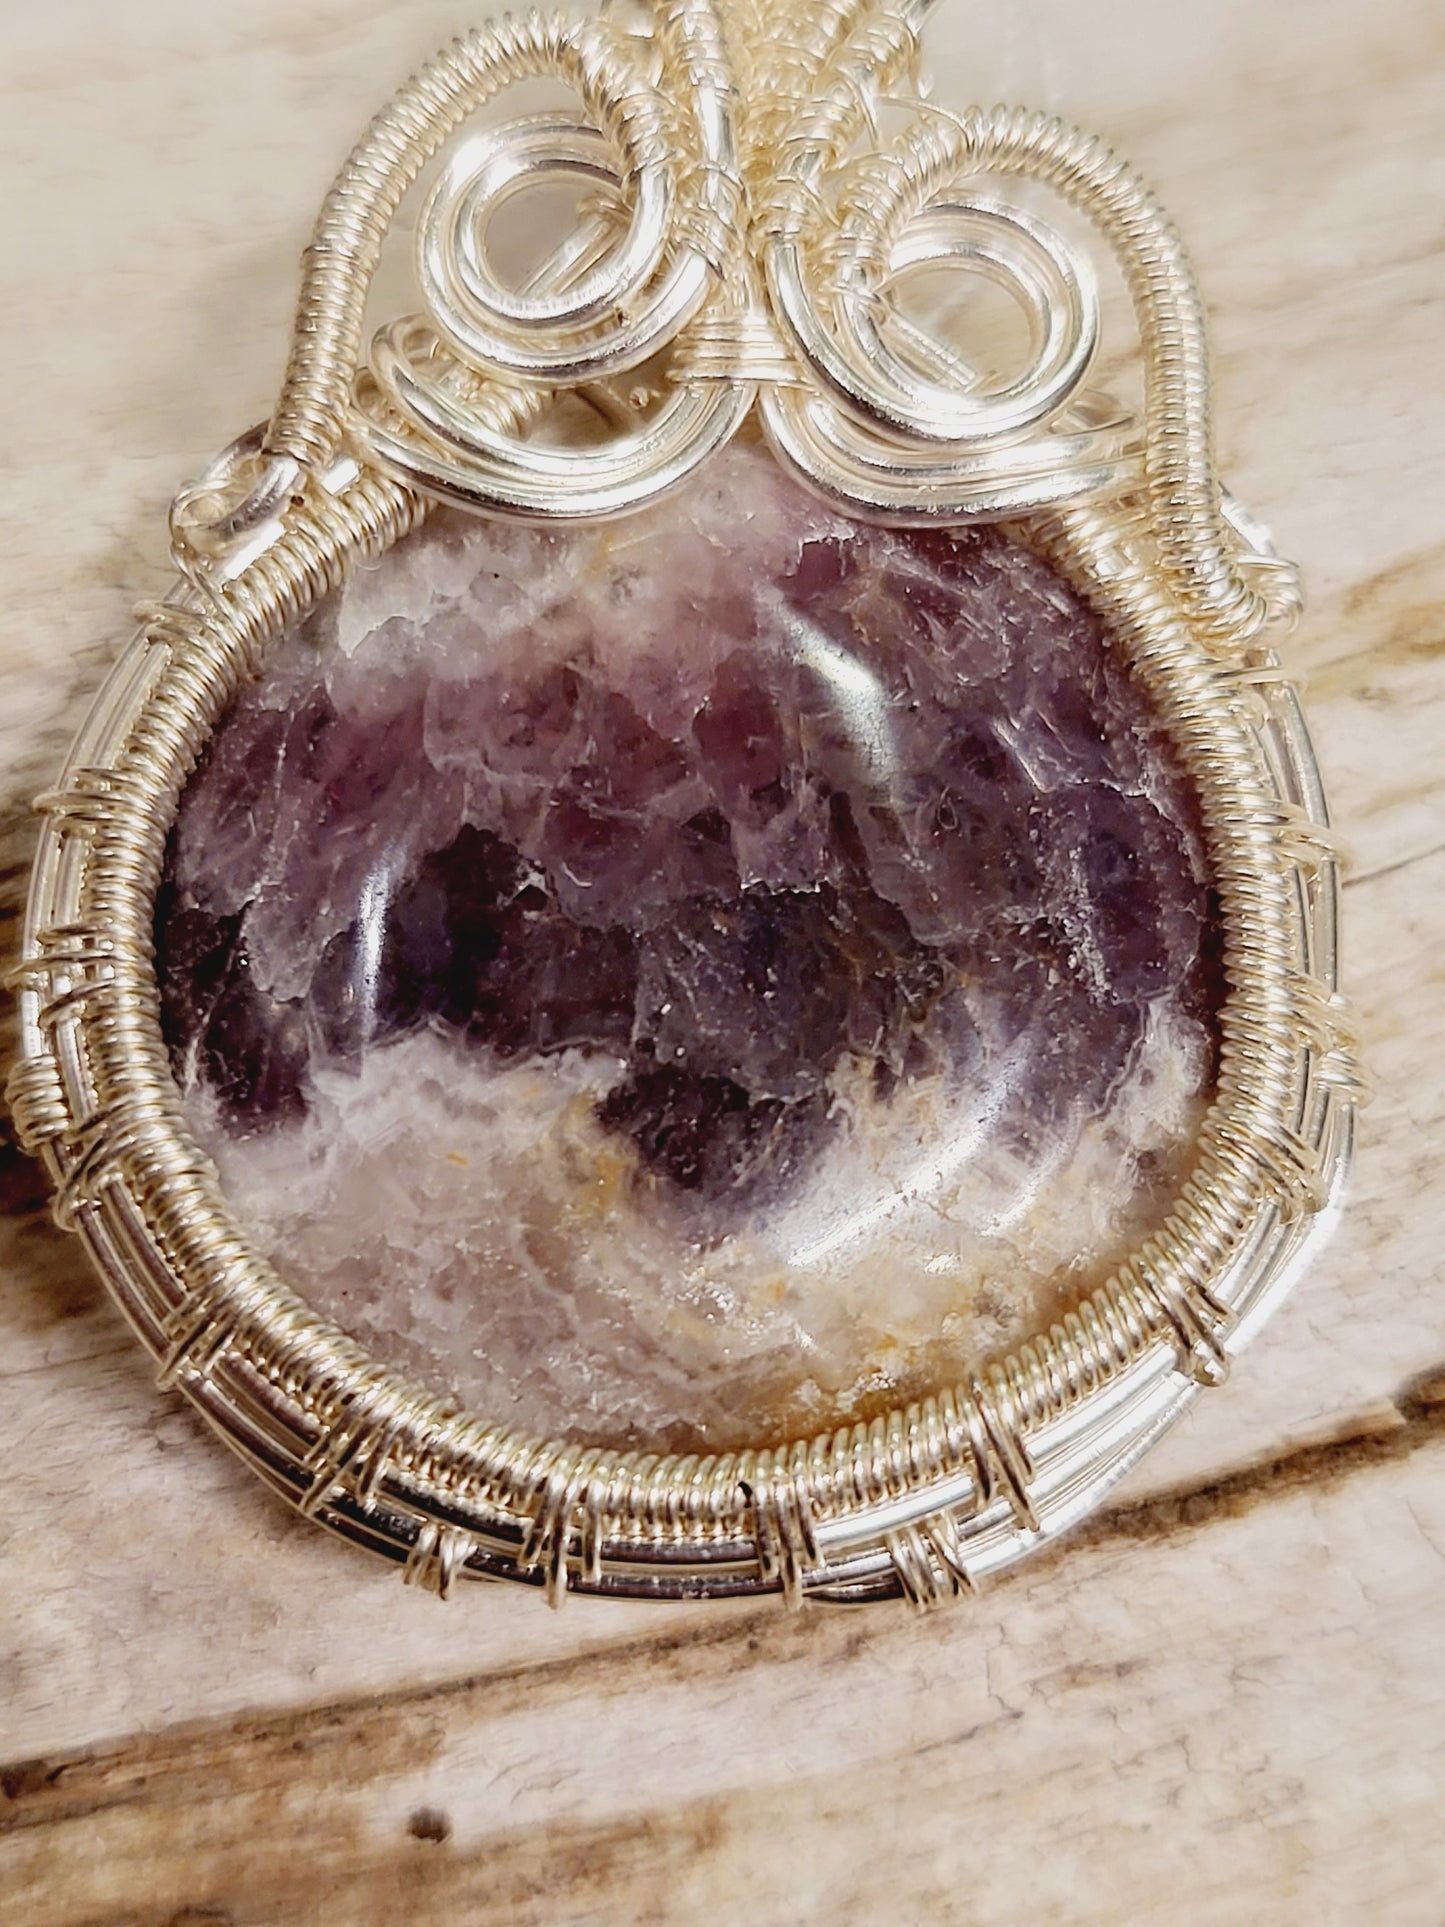 Amethyst Silver Wire Wrapped Necklace Pendant